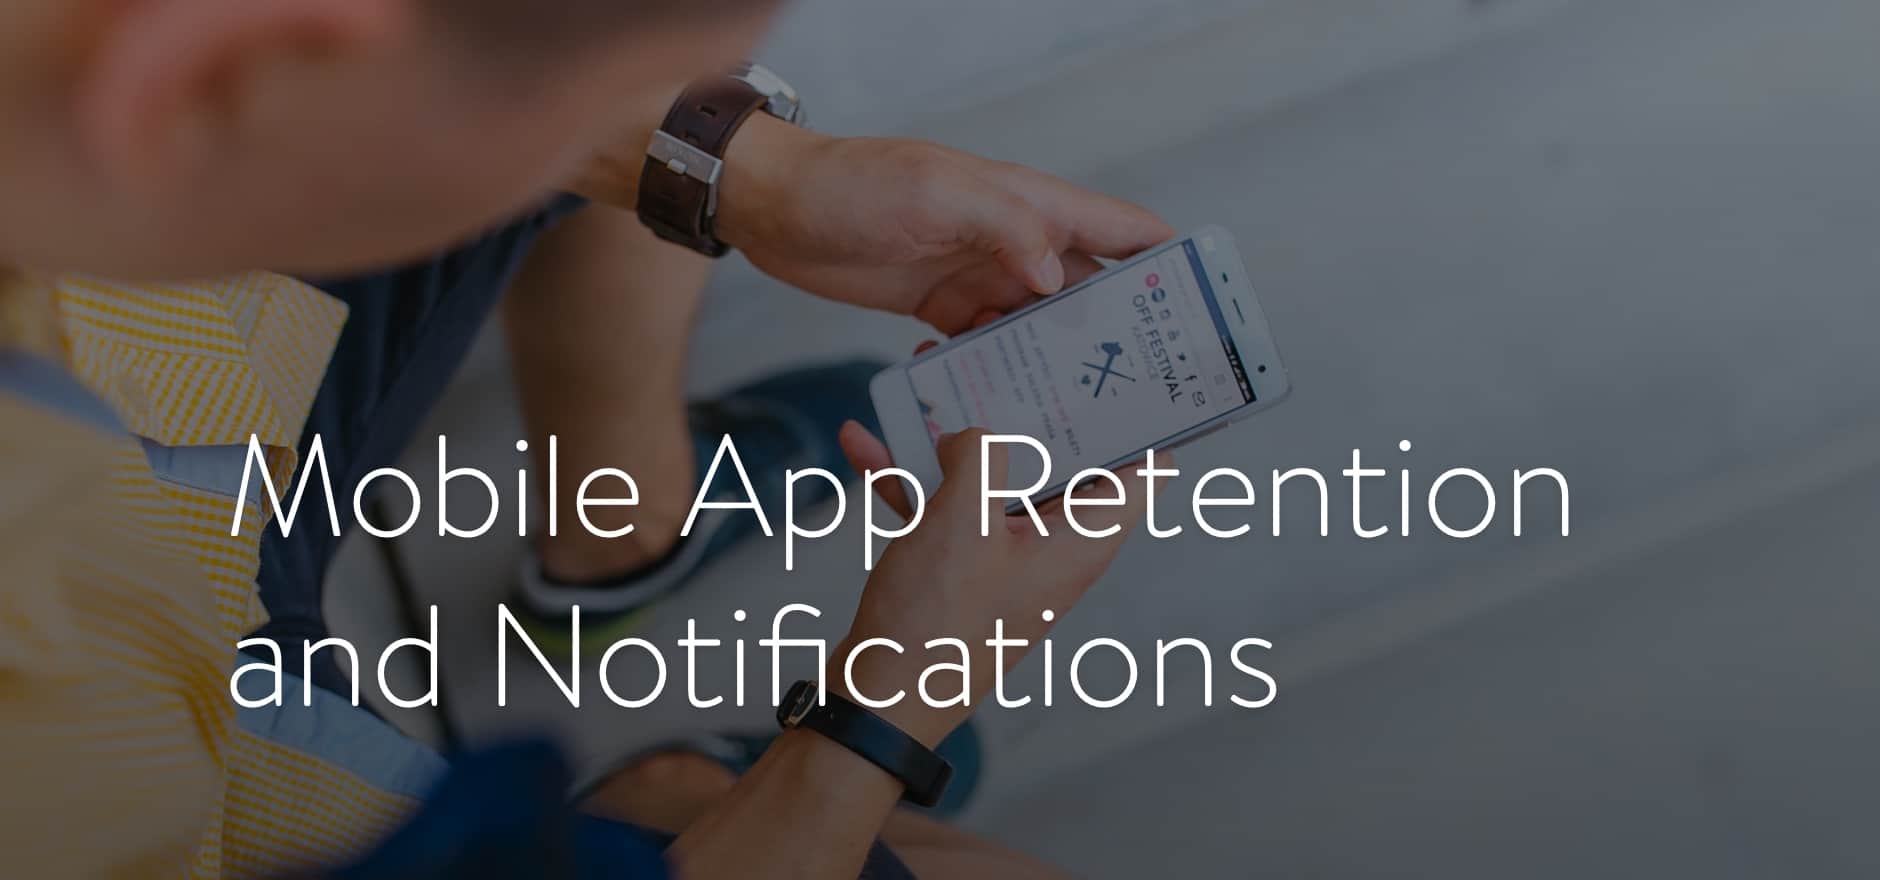 Mobile App Retention and Notifications